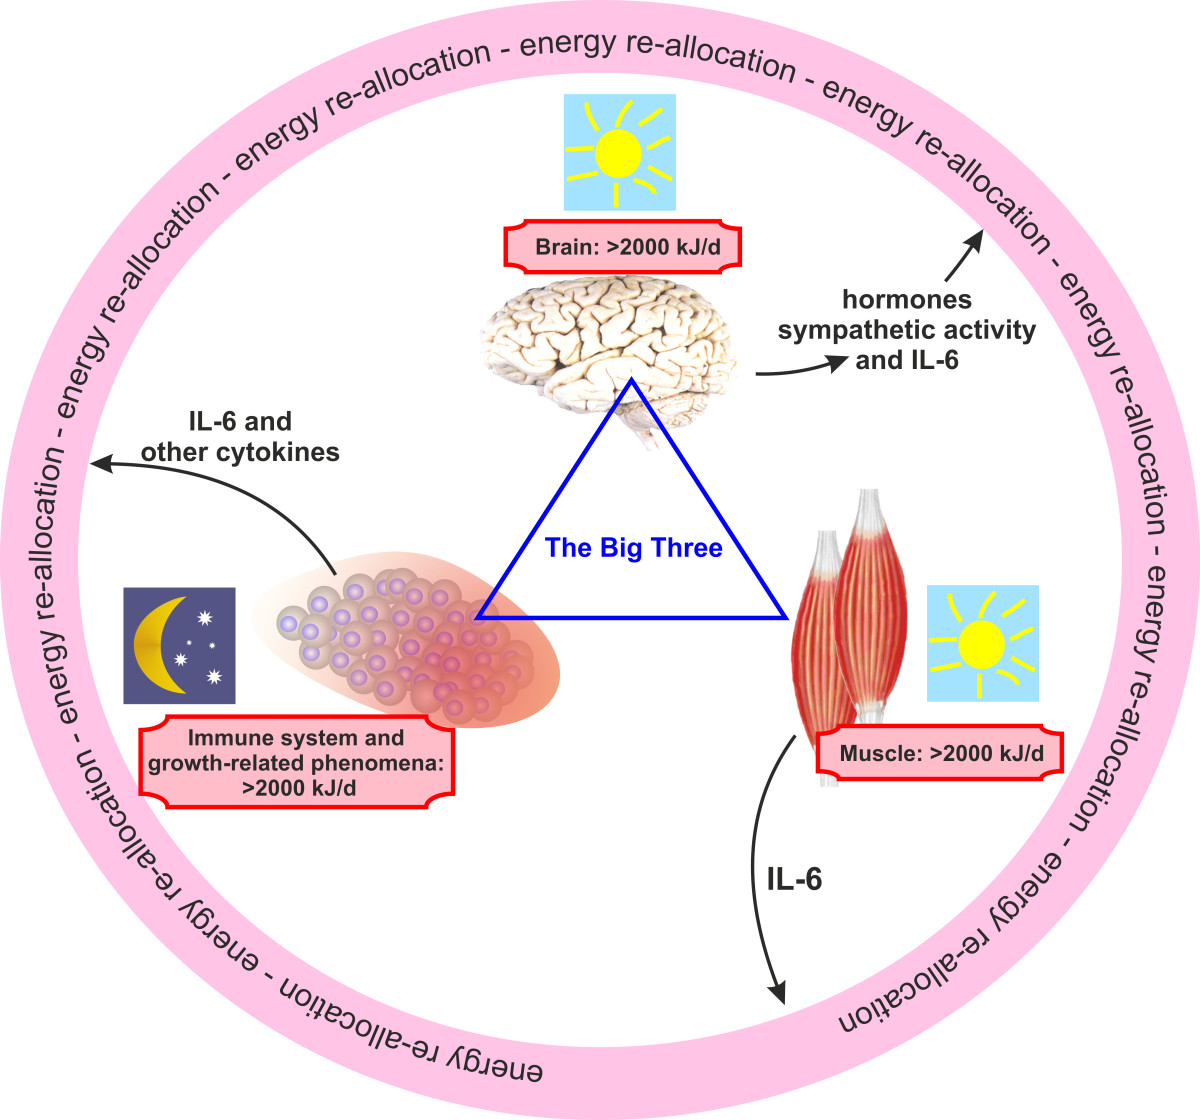 Interaction of the endocrine system with inflammation: a function of